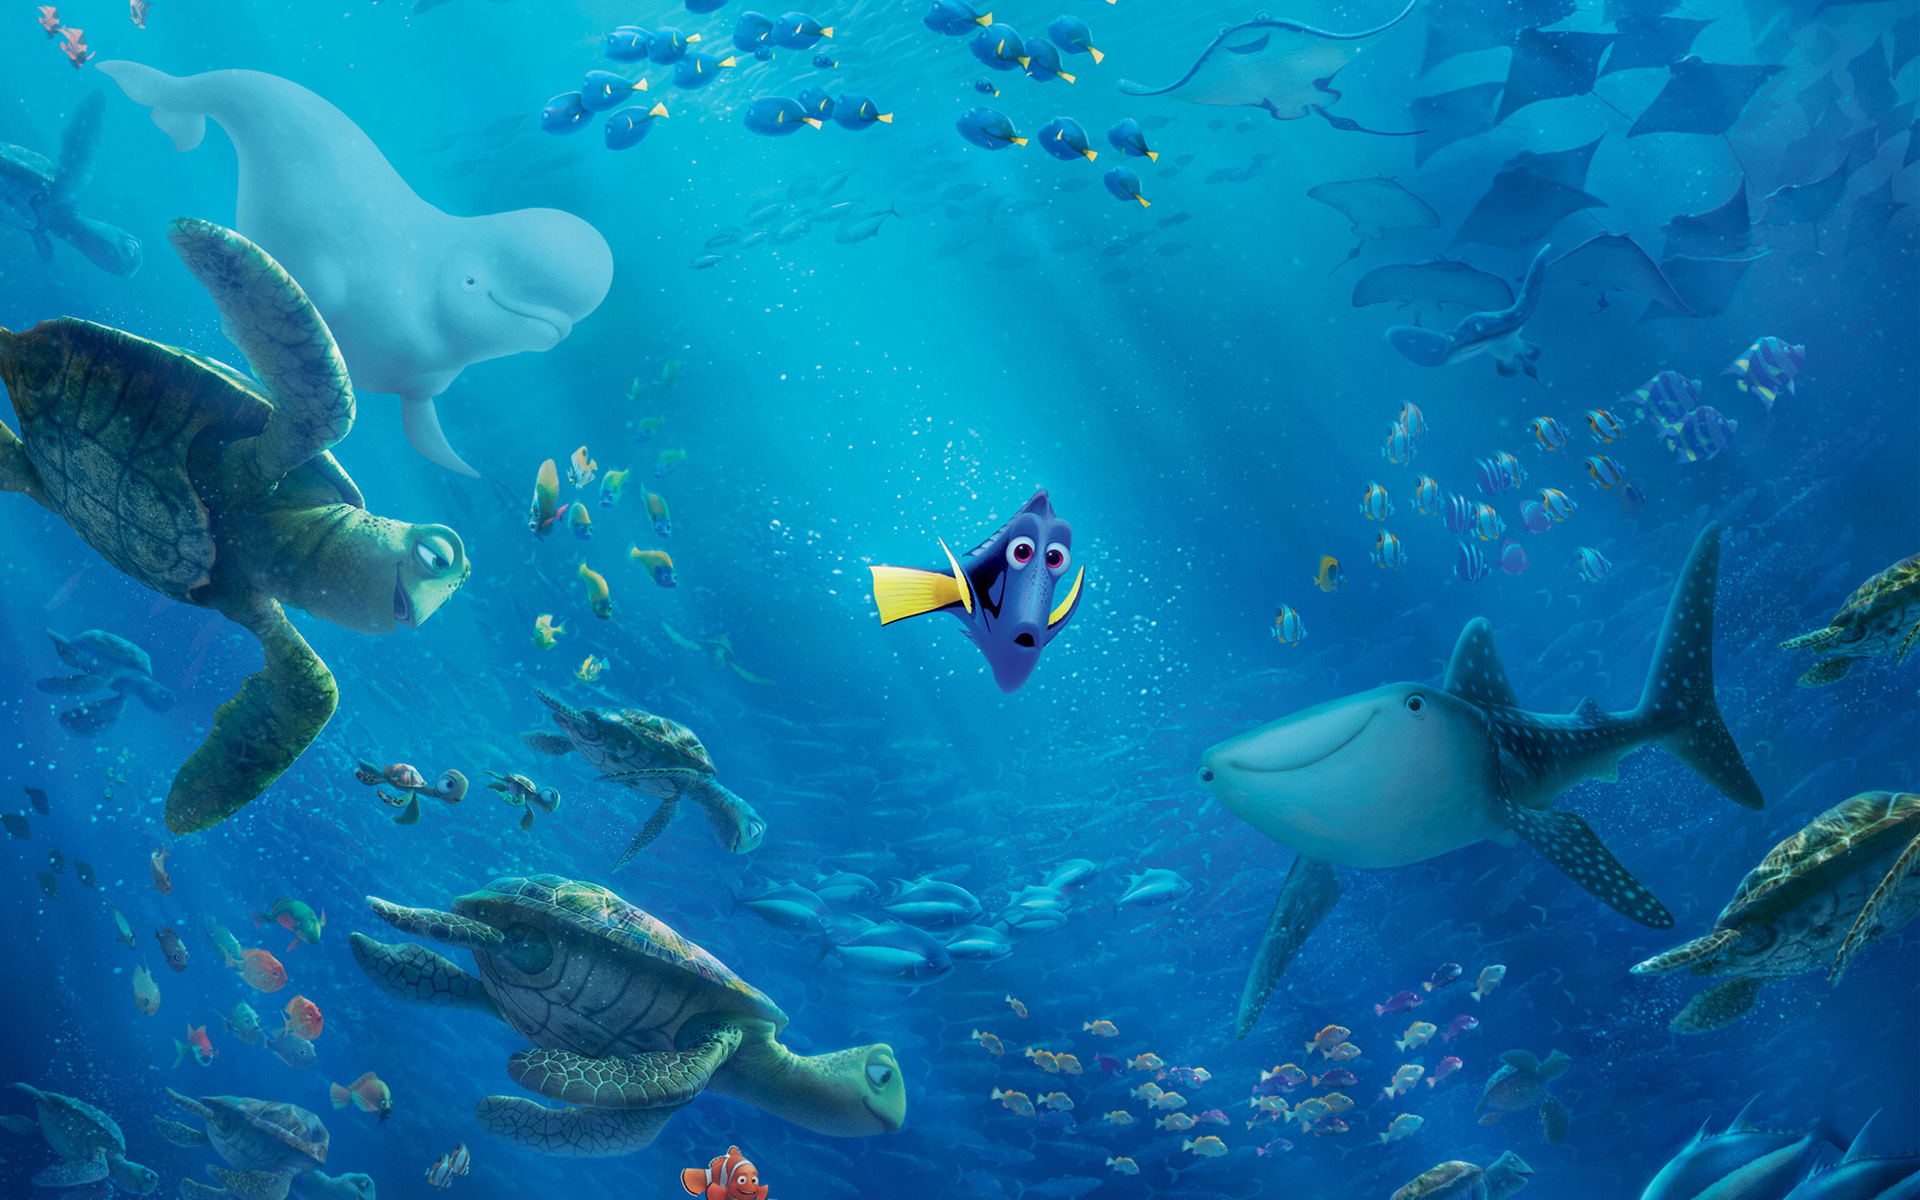 for windows download Finding Dory